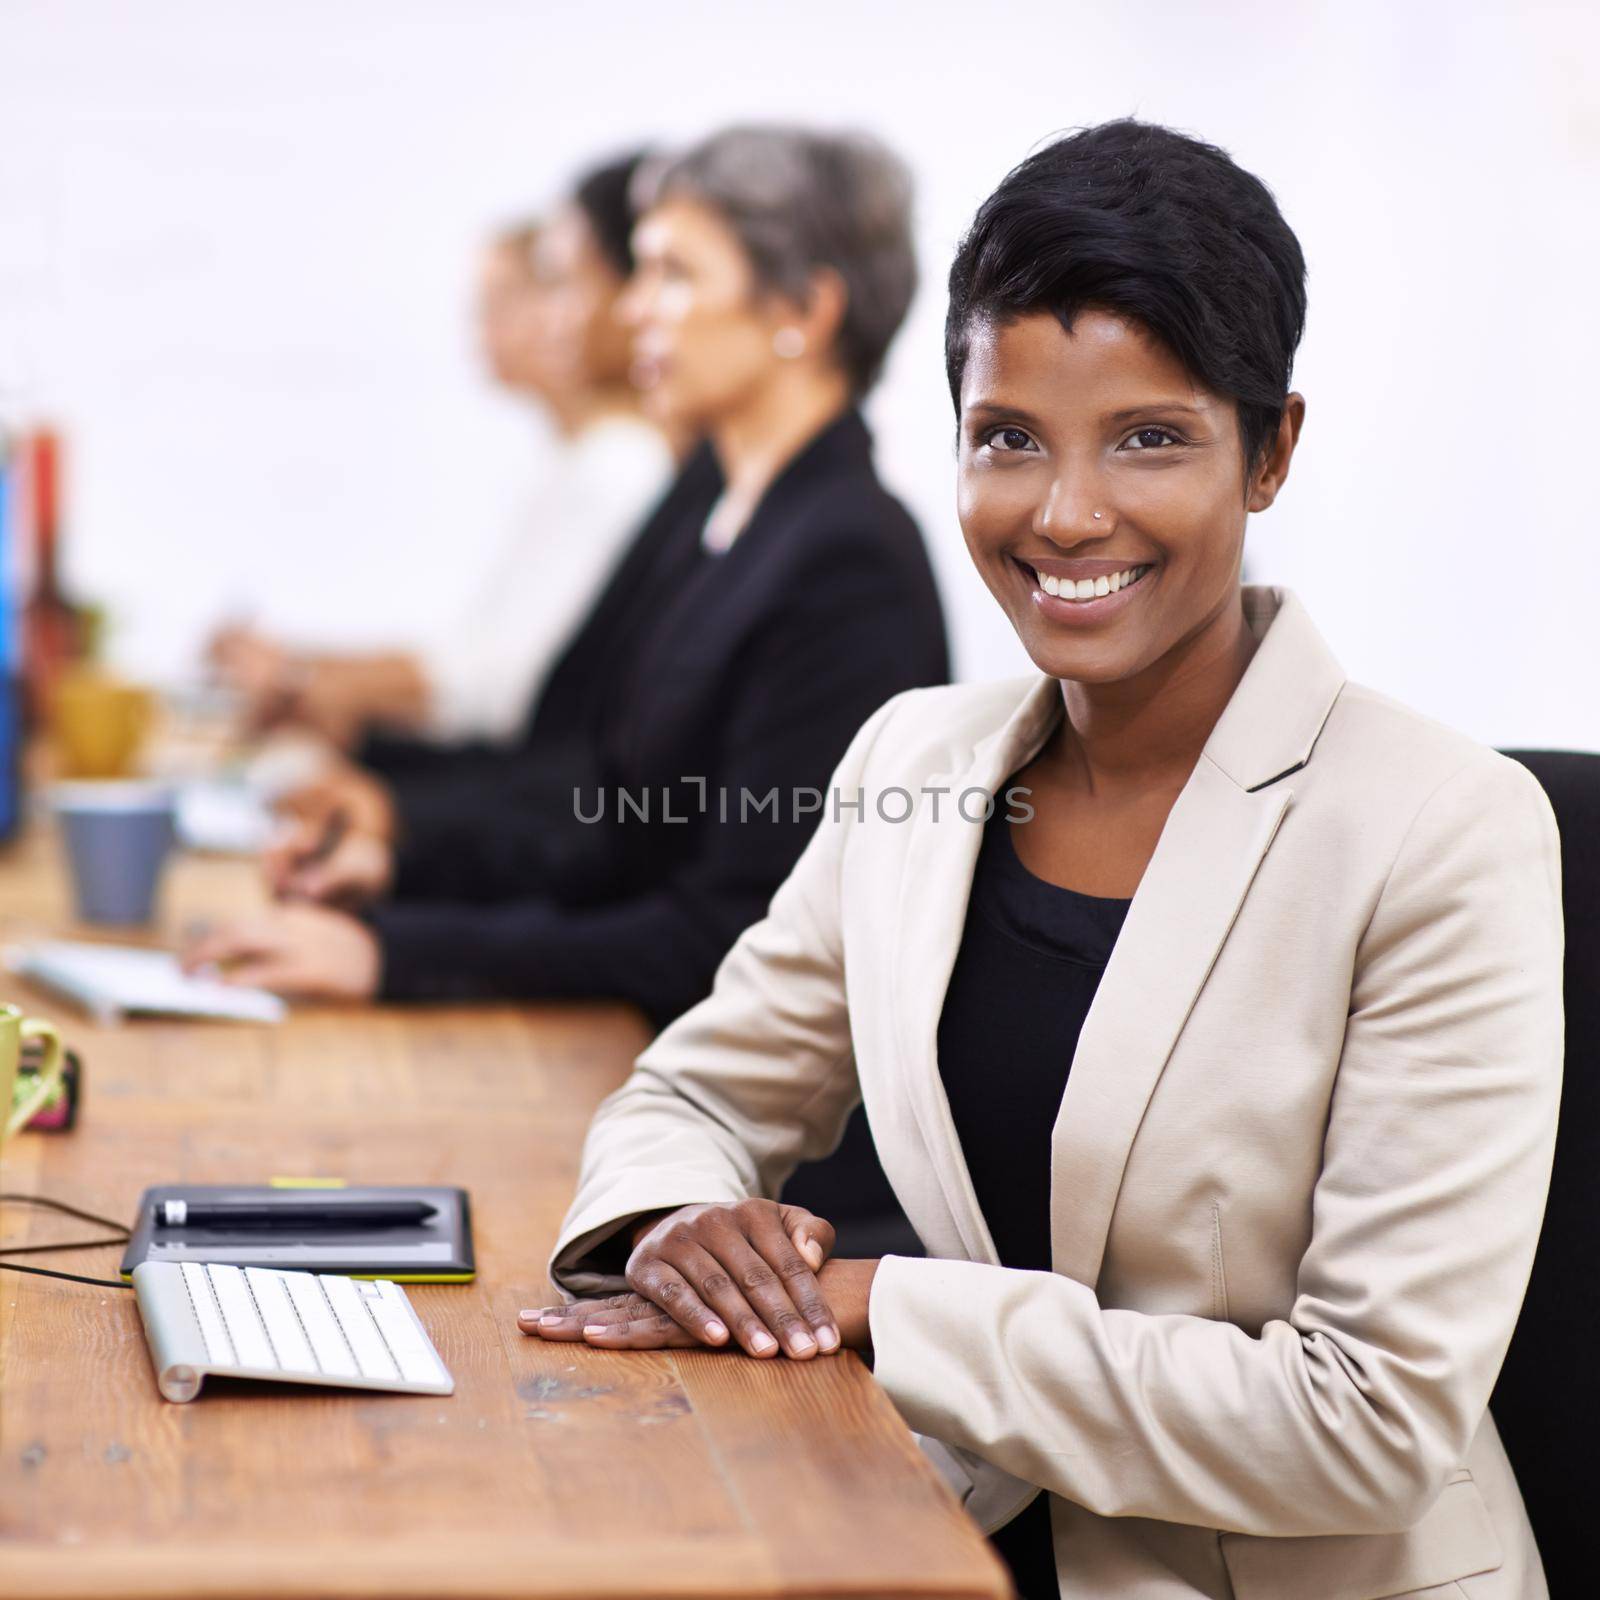 She really enjoys her work. Portrait of an attractive businesswoman sitting at a desk